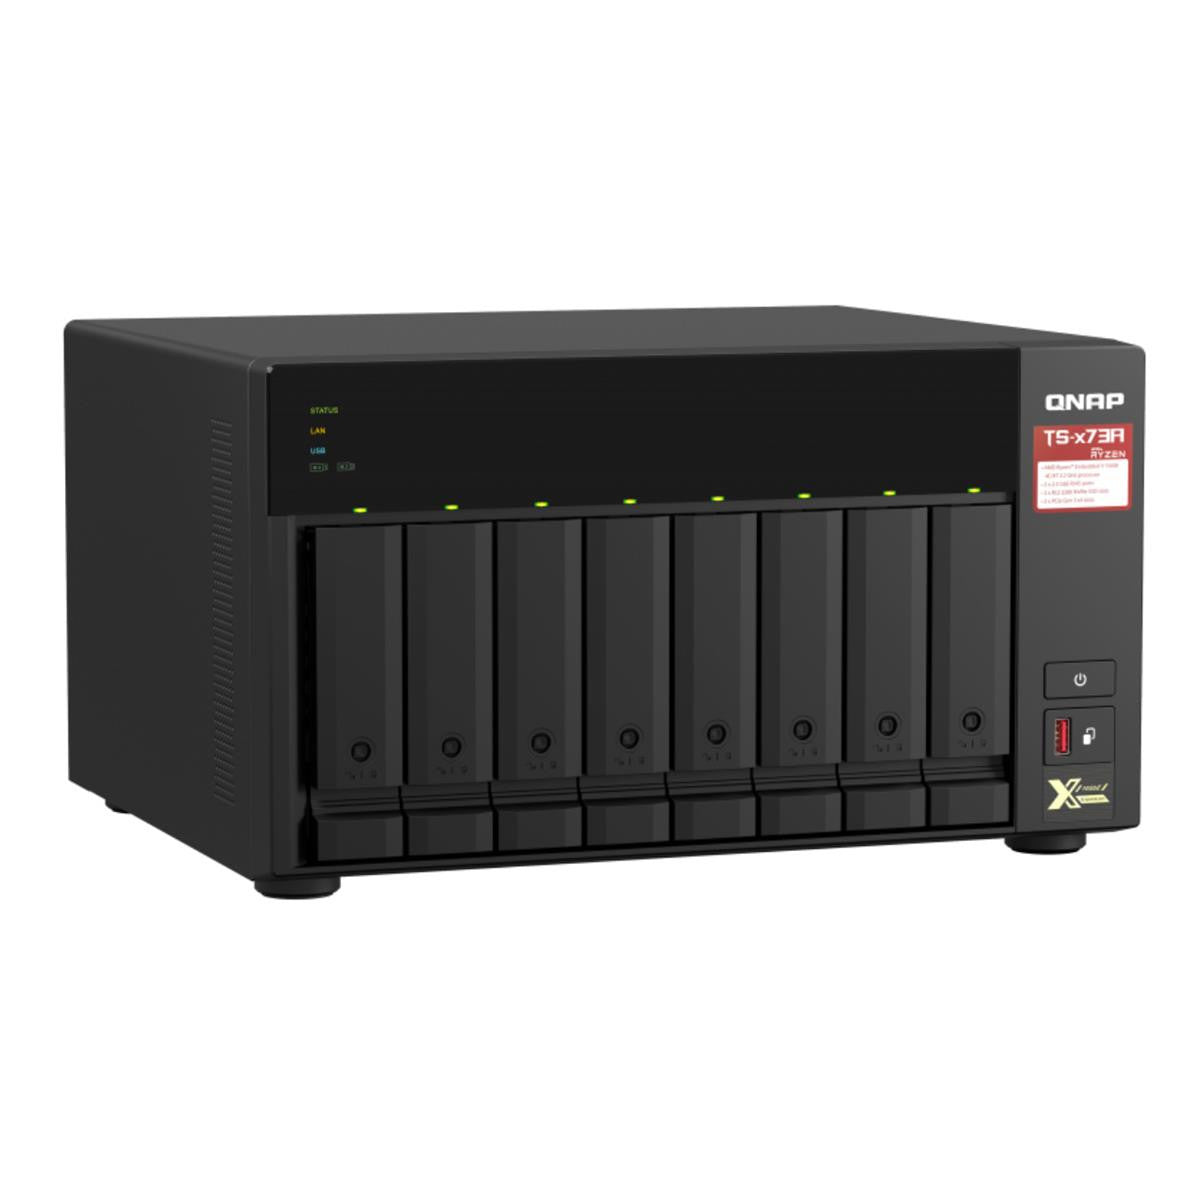 QNAP TS-873A 8-BAY NAS with 8GB DDR4 RAM and 112TB (8x14TB) Western Digital RED PLUS Drives Fully Assembled and Tested